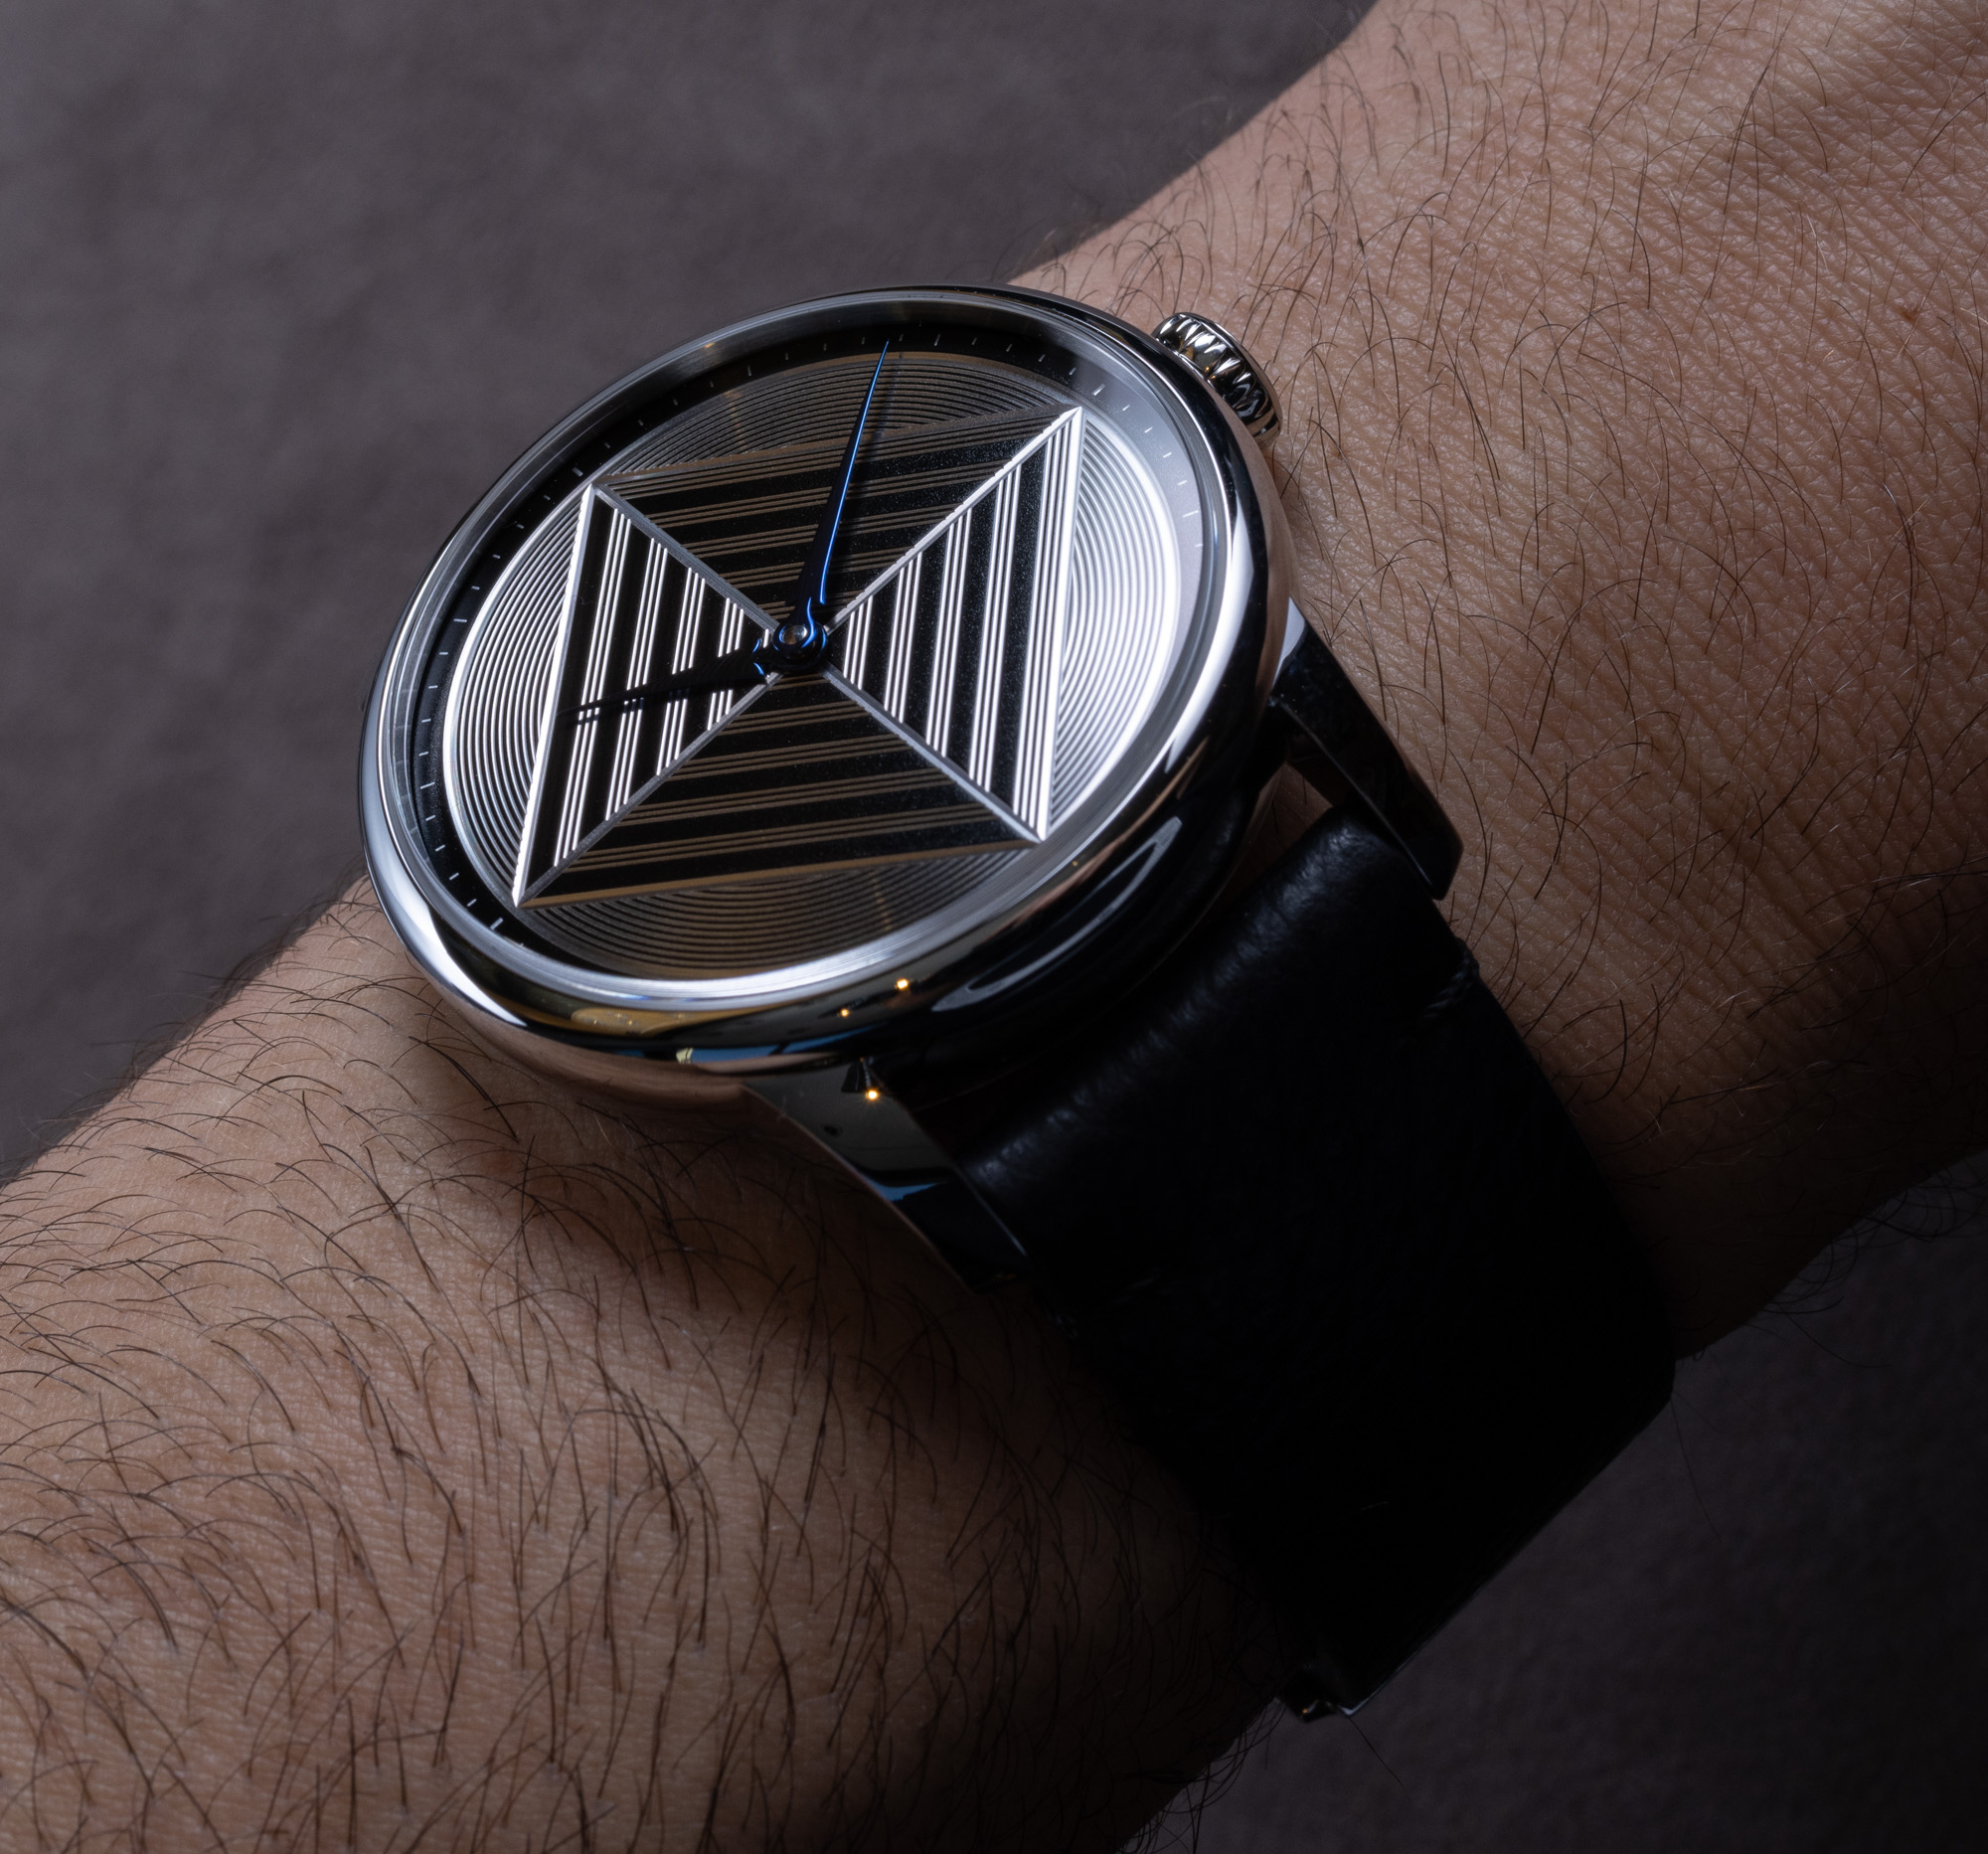 Hands-On: Louis Erard Excellence Guilloché Main I & II Watches